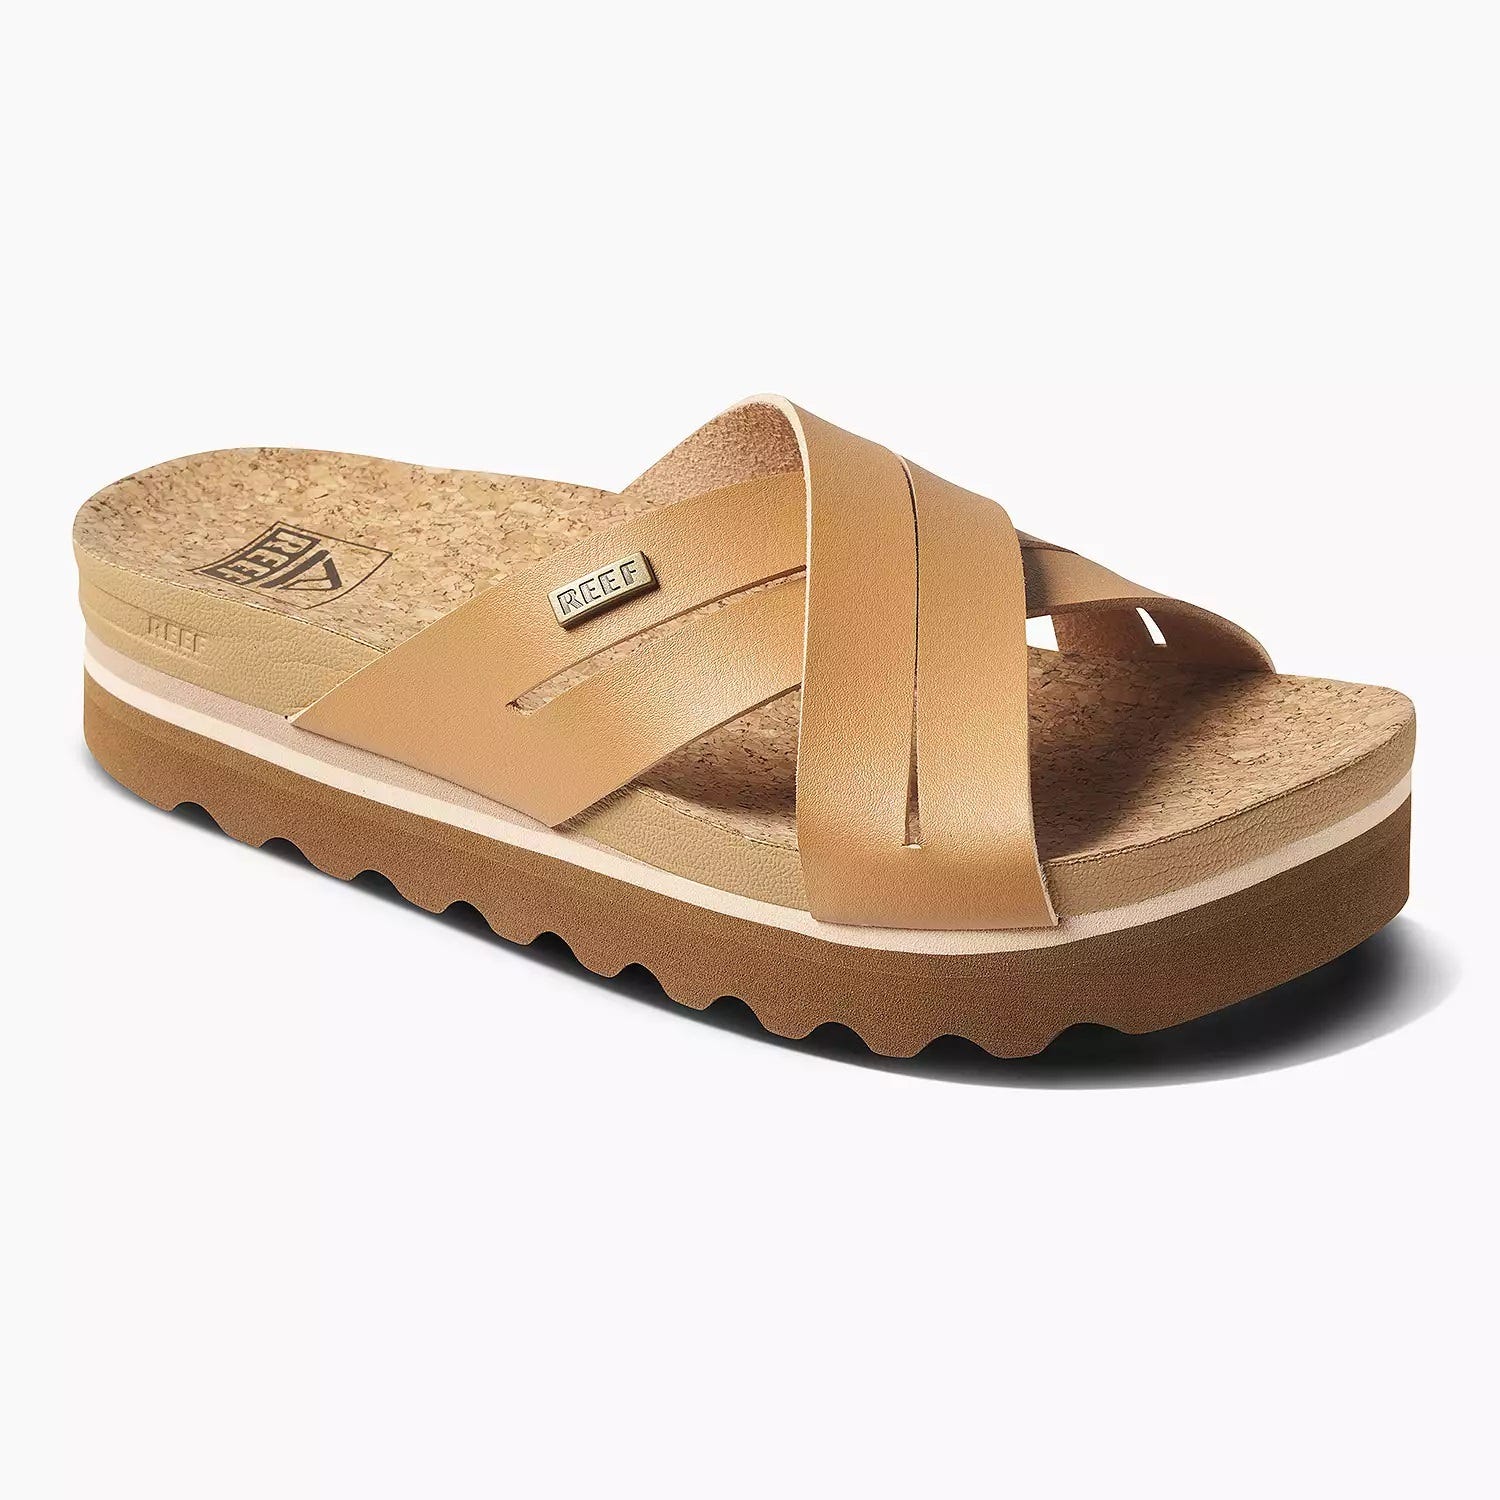 A pair of cork-soled platform sandals with wide tan straps displaying the REEF brand logo.